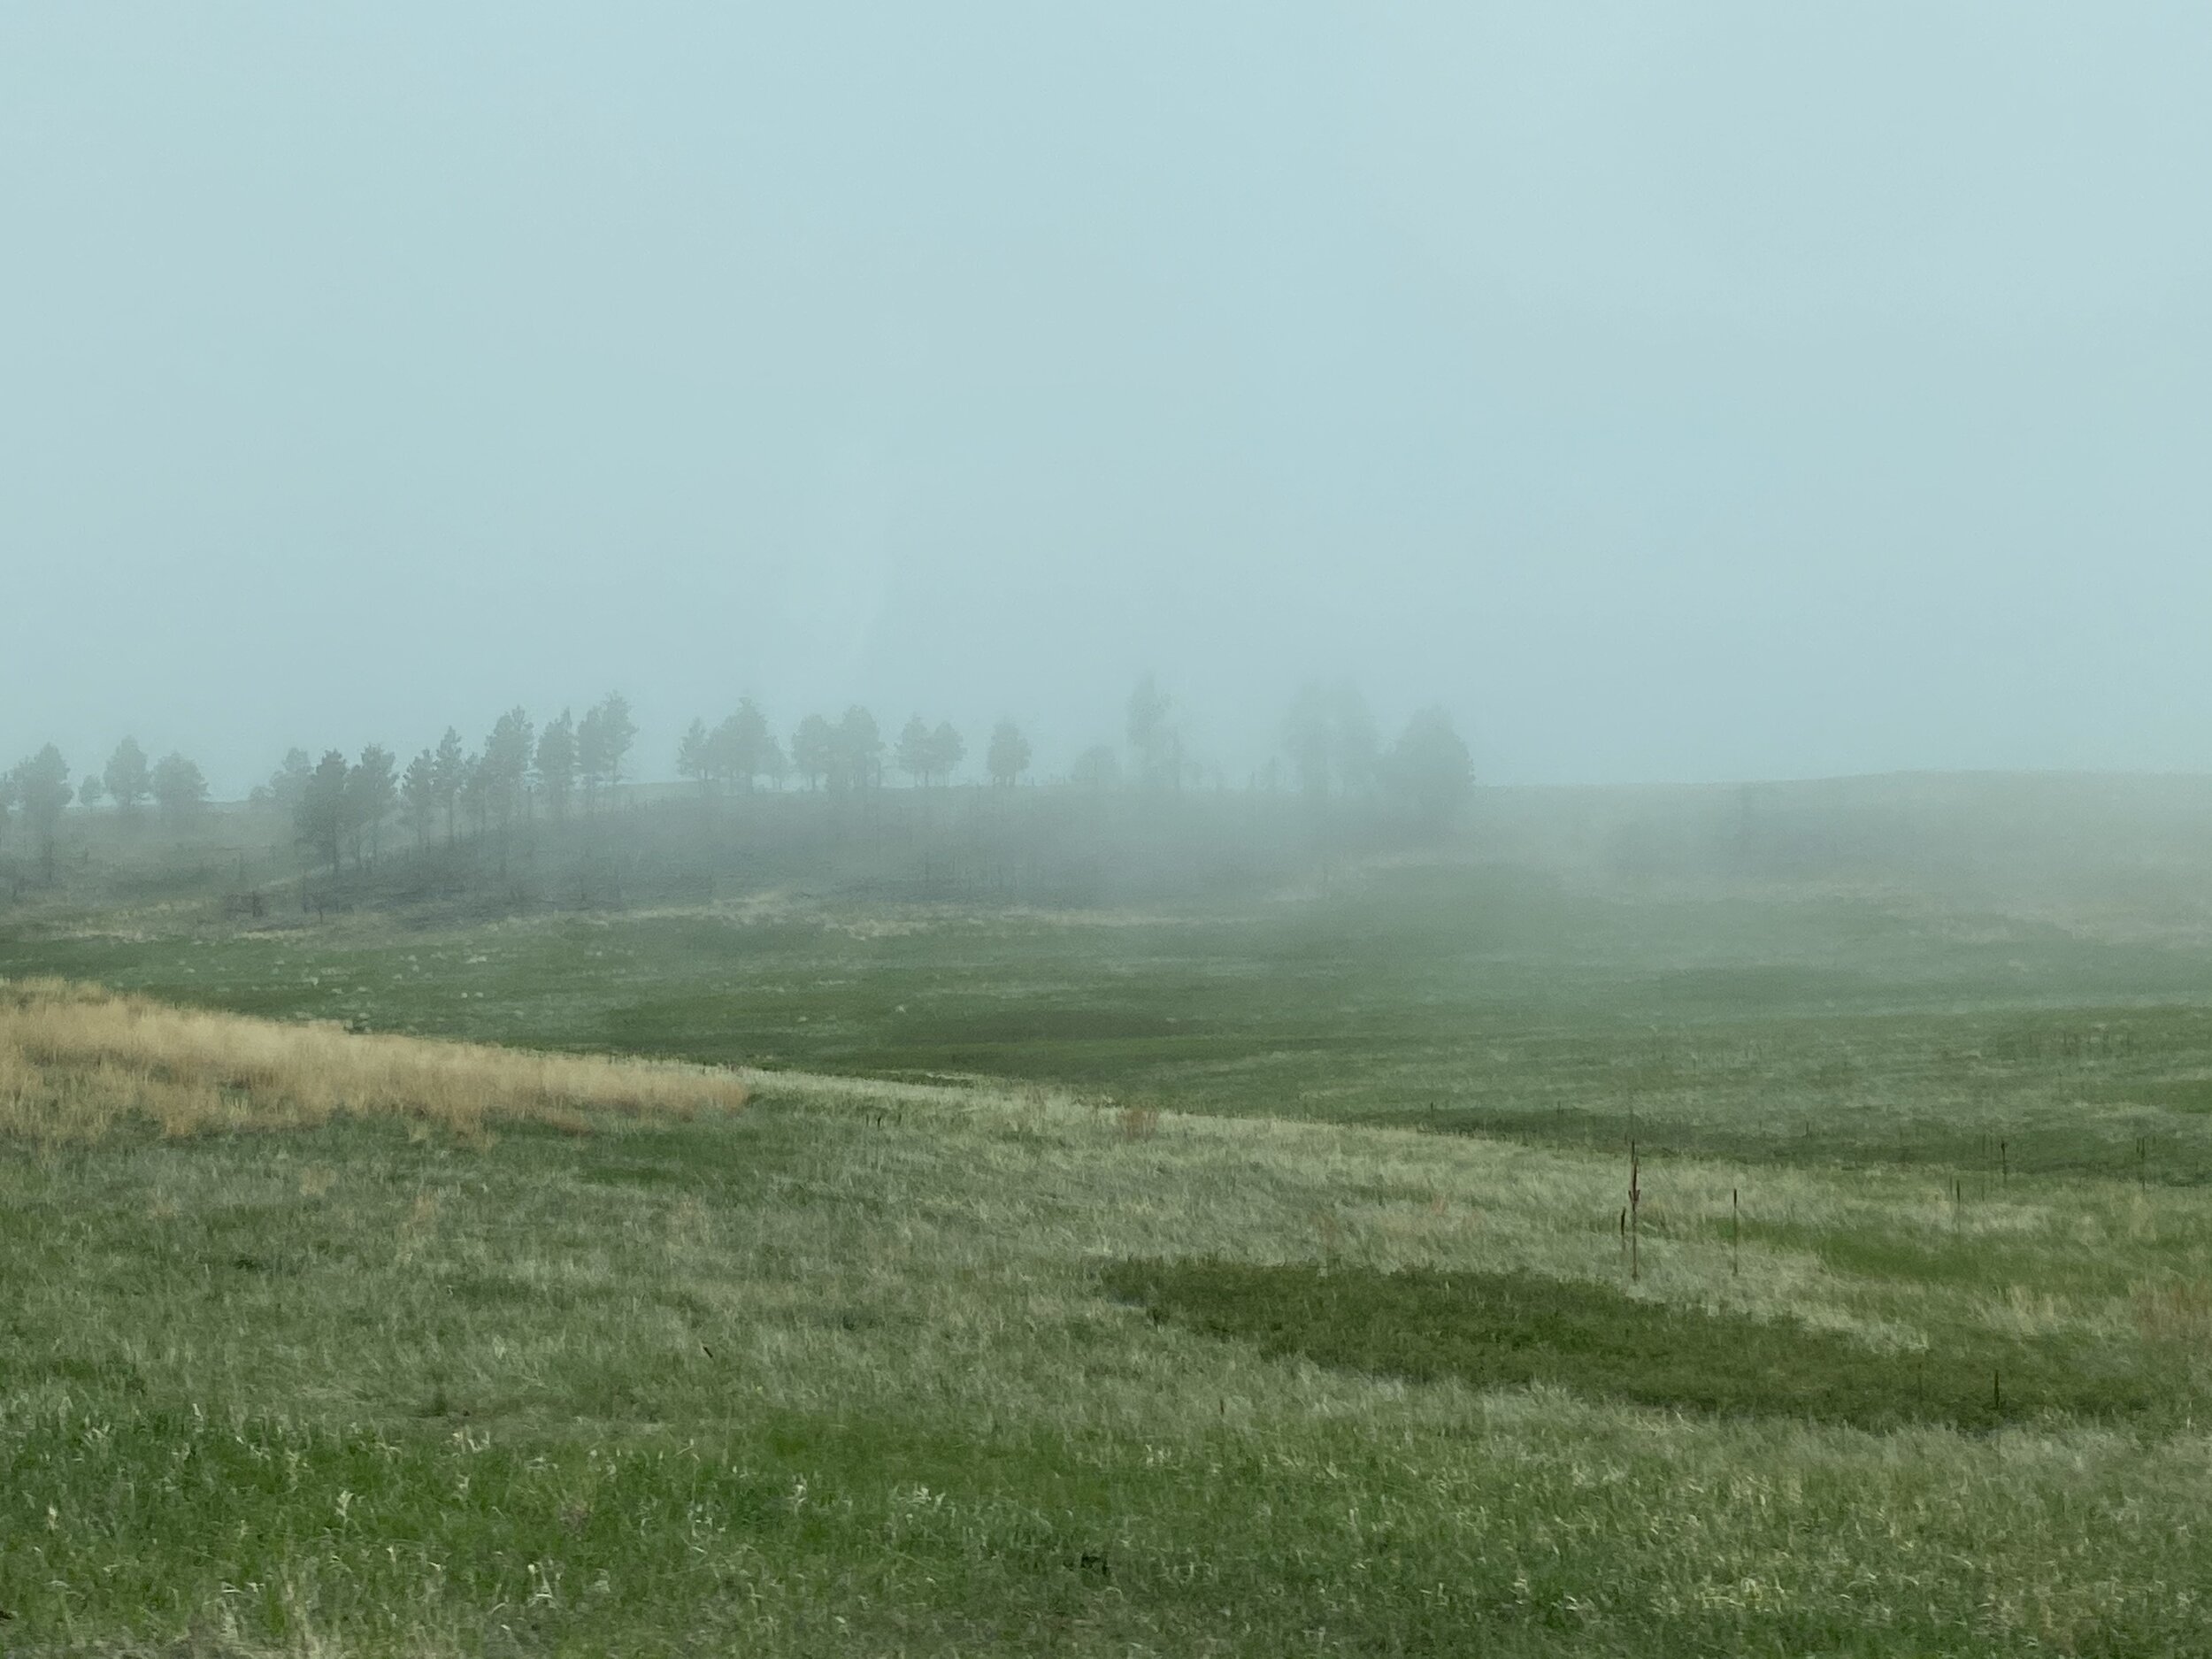 Foggy day for driving to check out the views.  Photo by Karen Boudreaux, 5/27/21